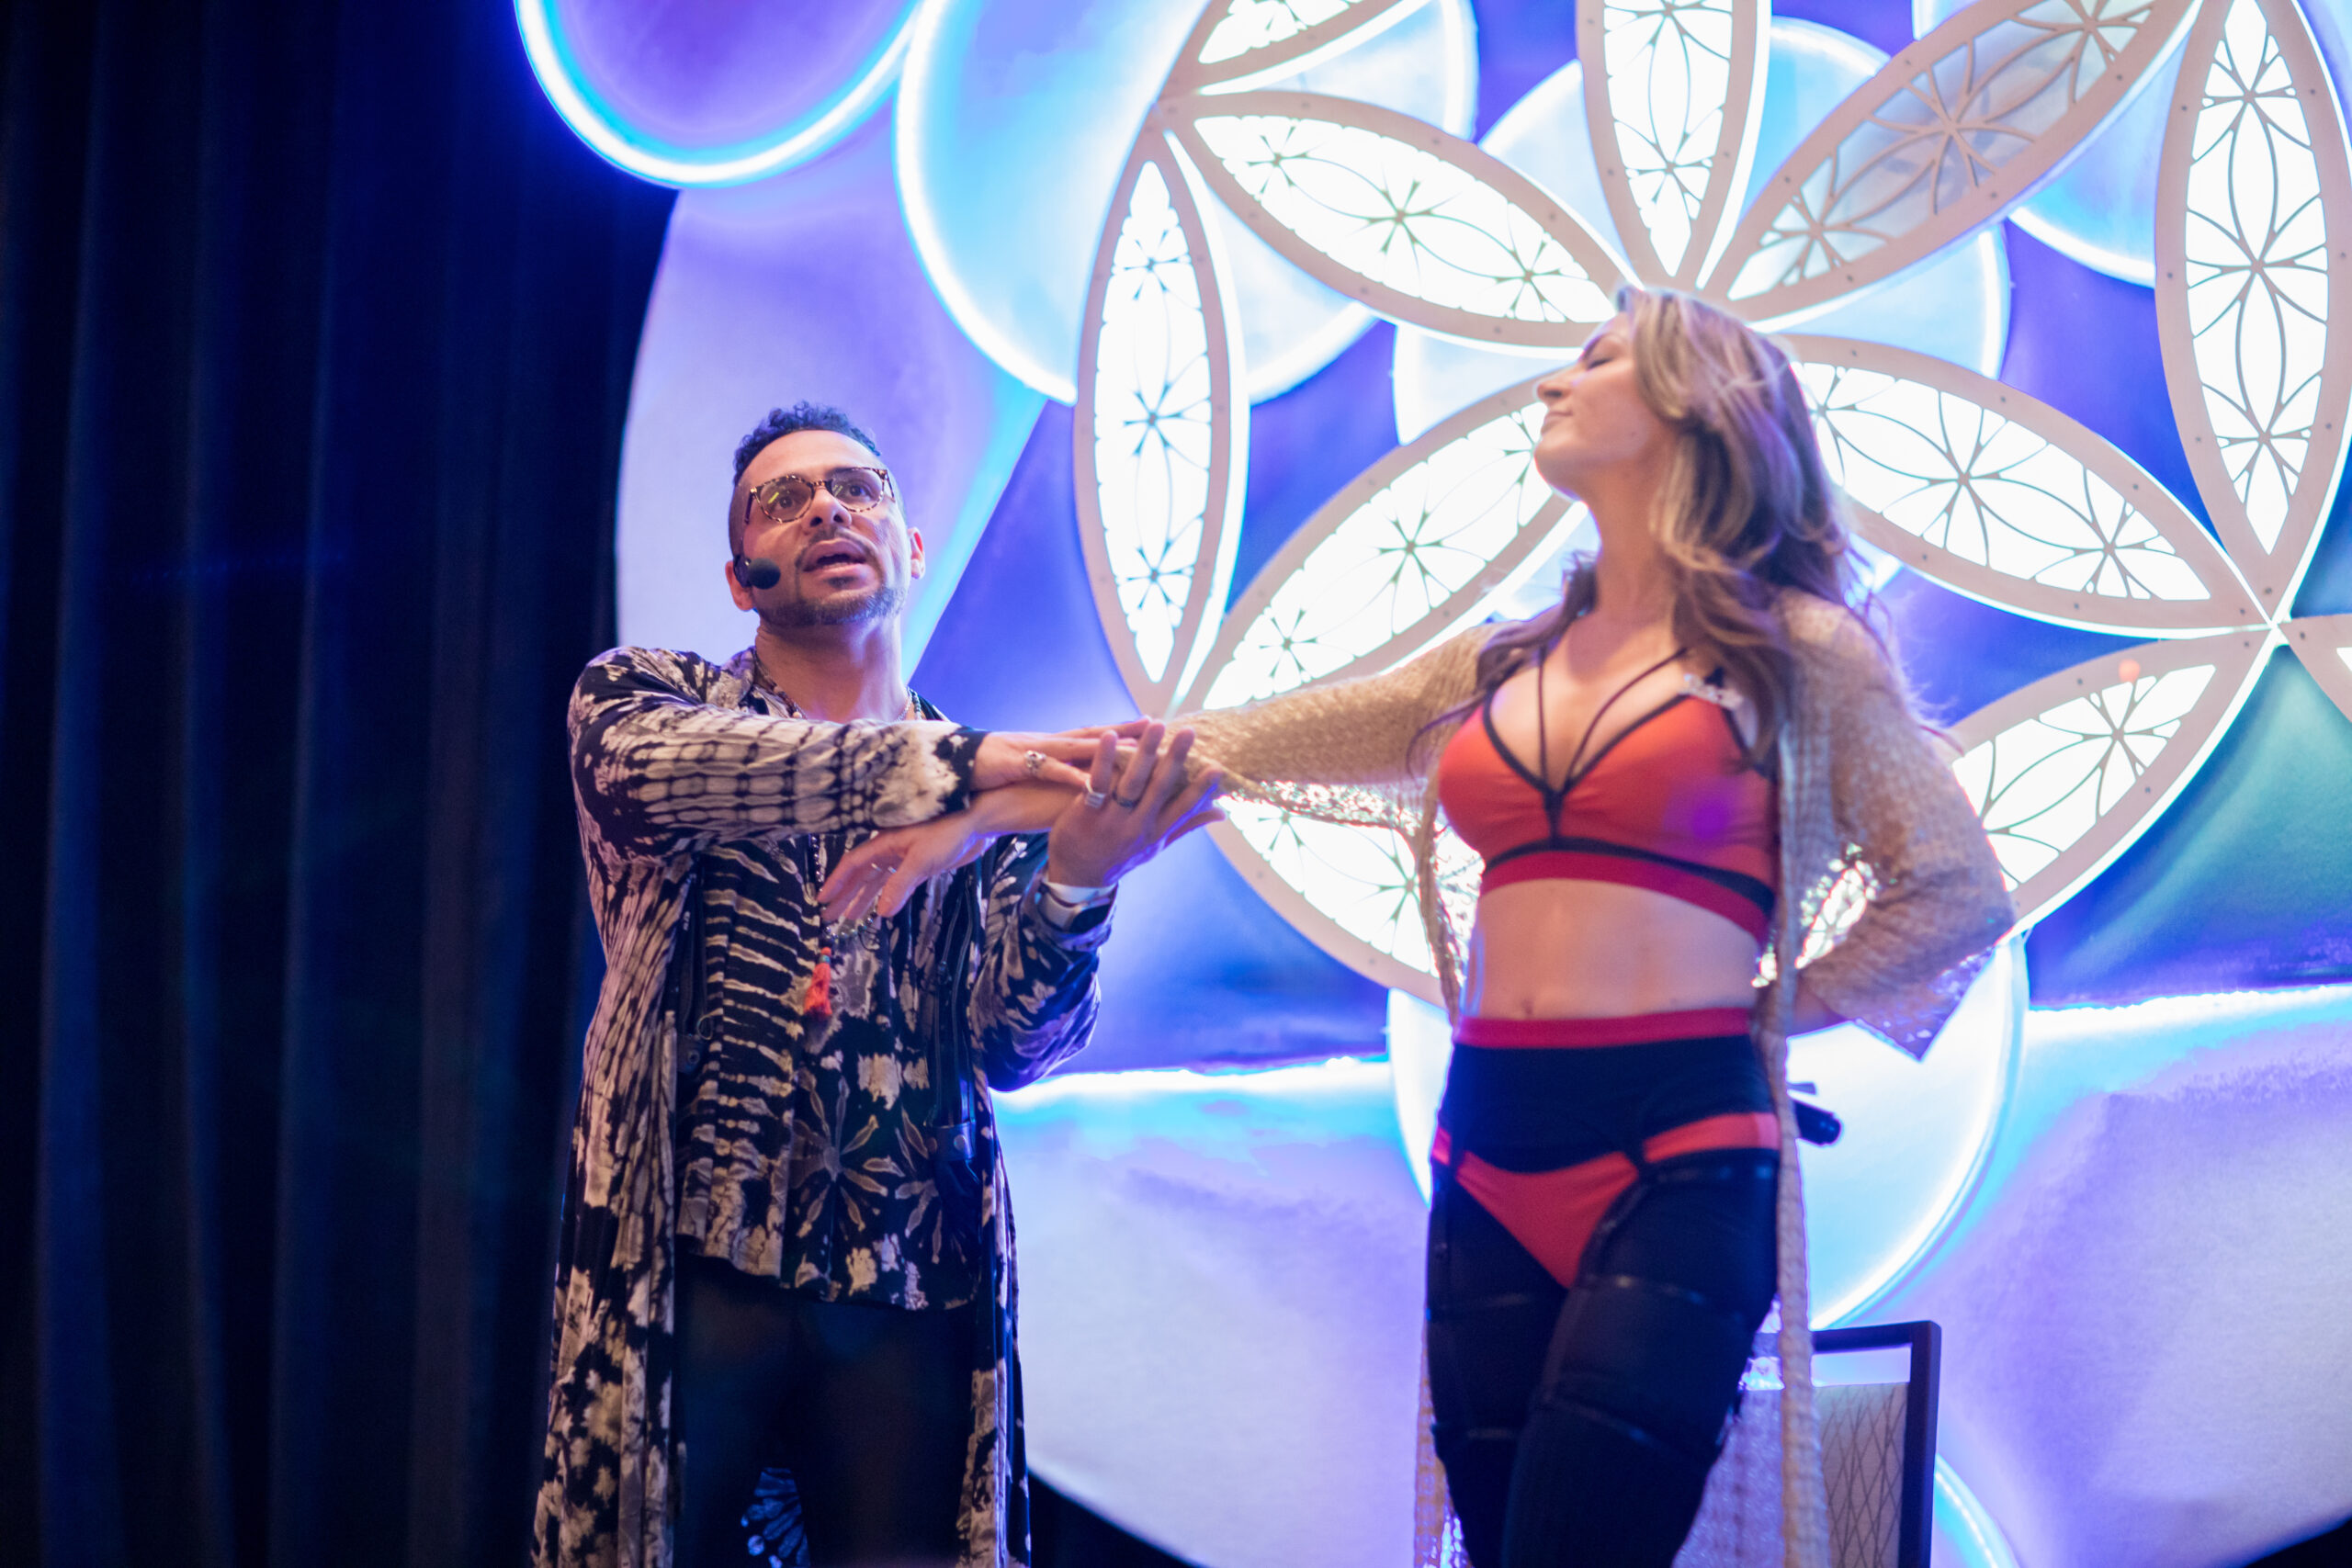 Sex coach Stacie Ysidro and Johnny Vajra on stage at interfusion 2022